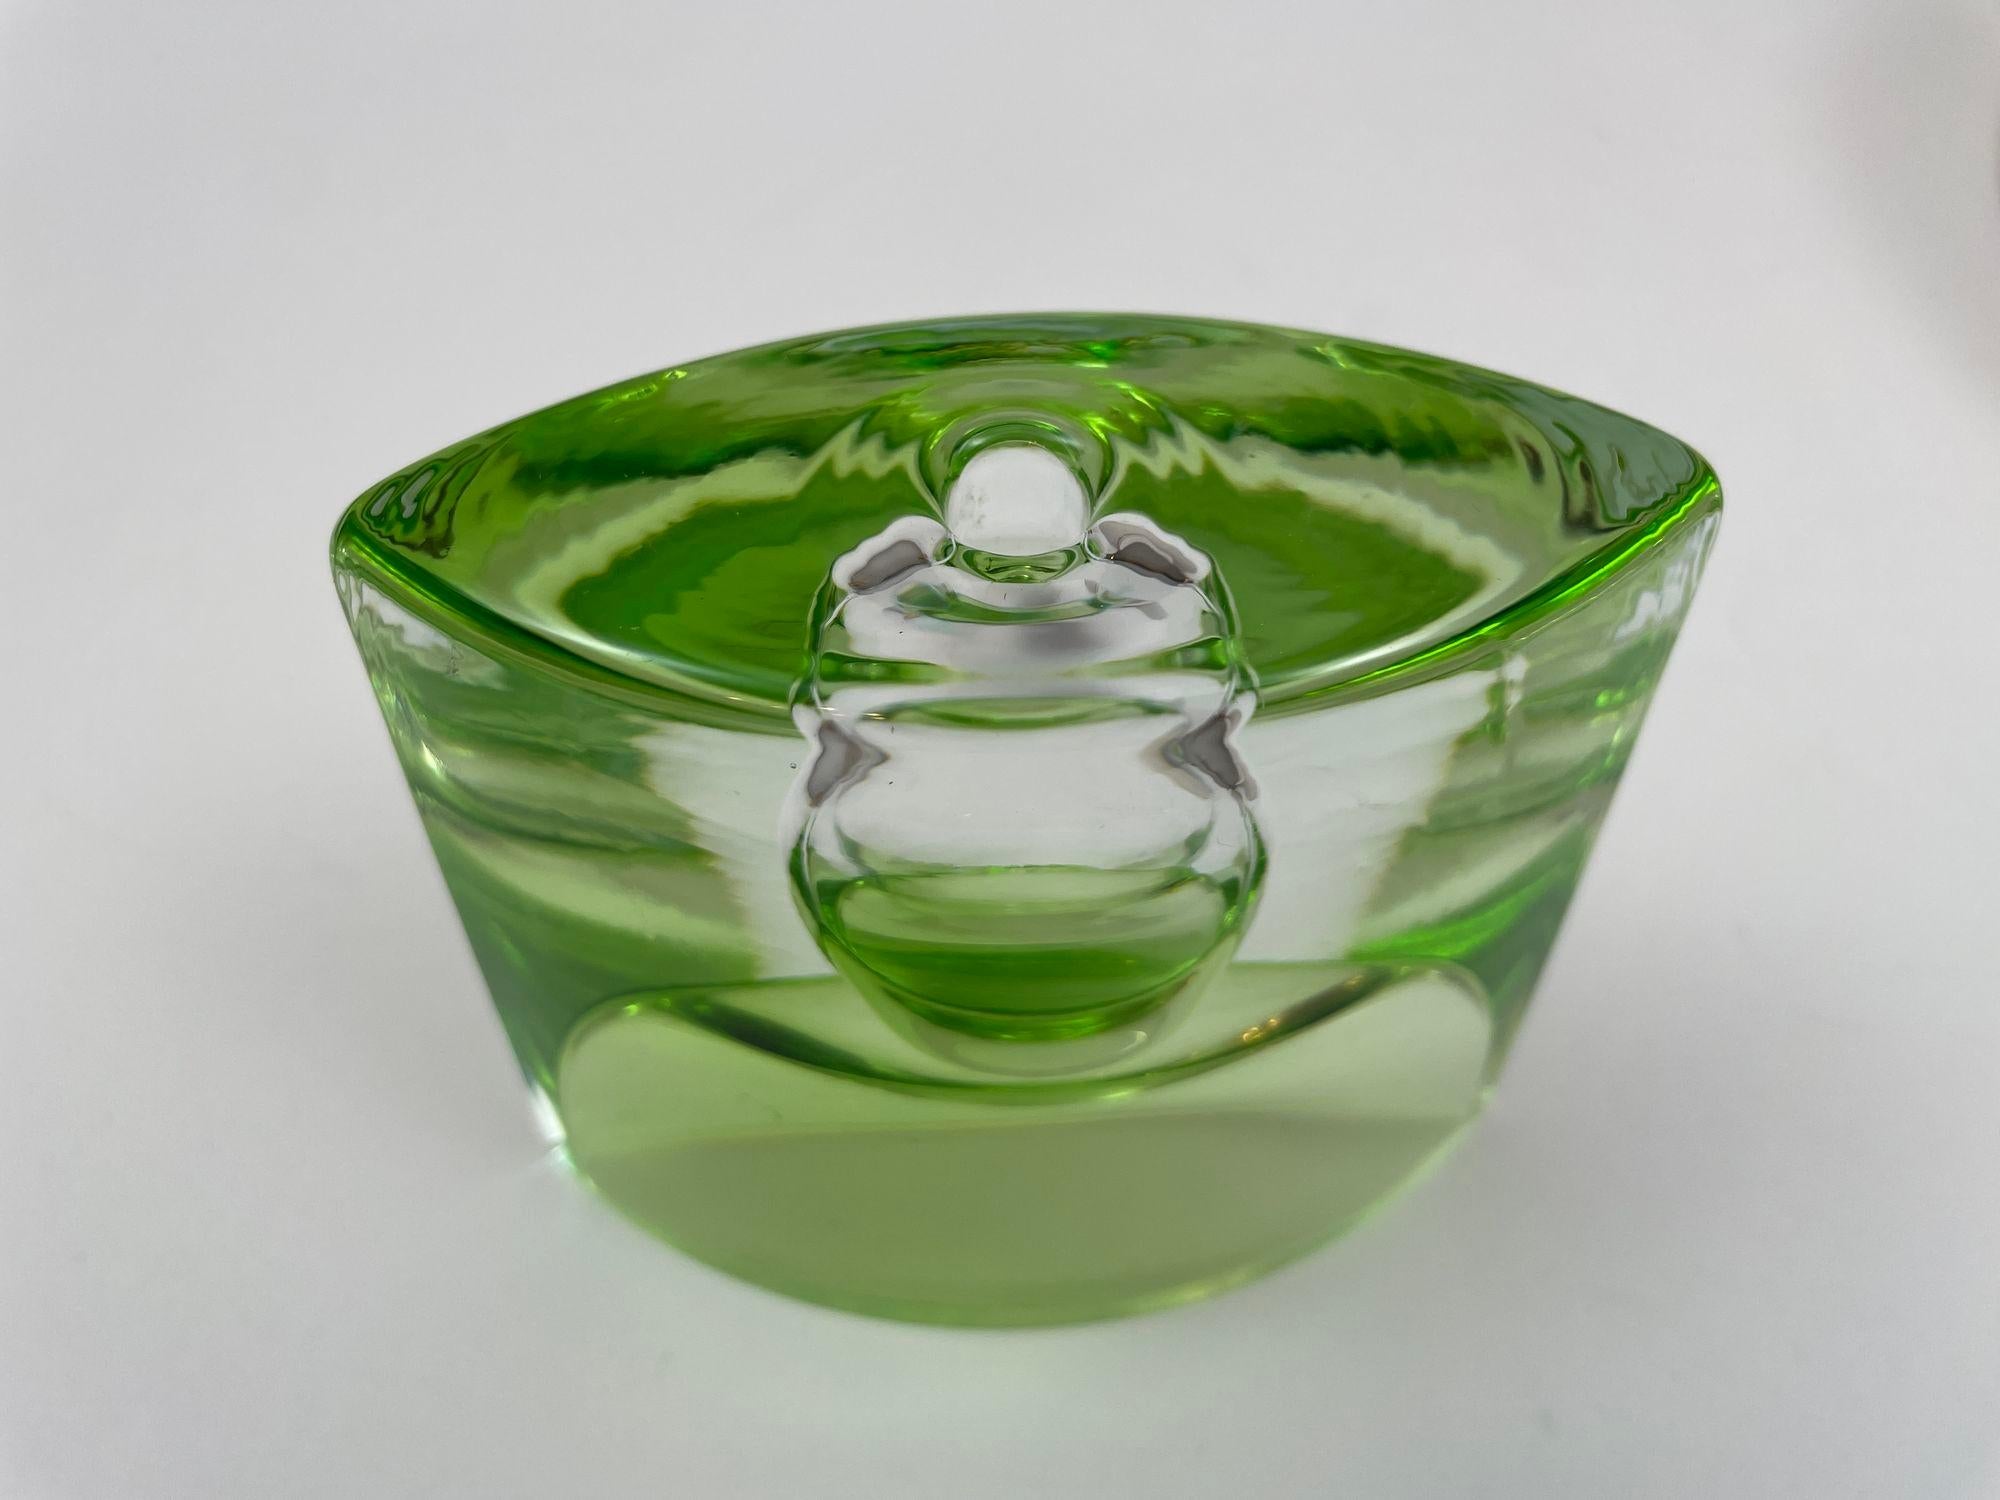 Krosno Poland Vintage Green Art Glass Bud Vase or Candle Holder In Good Condition For Sale In North Hollywood, CA